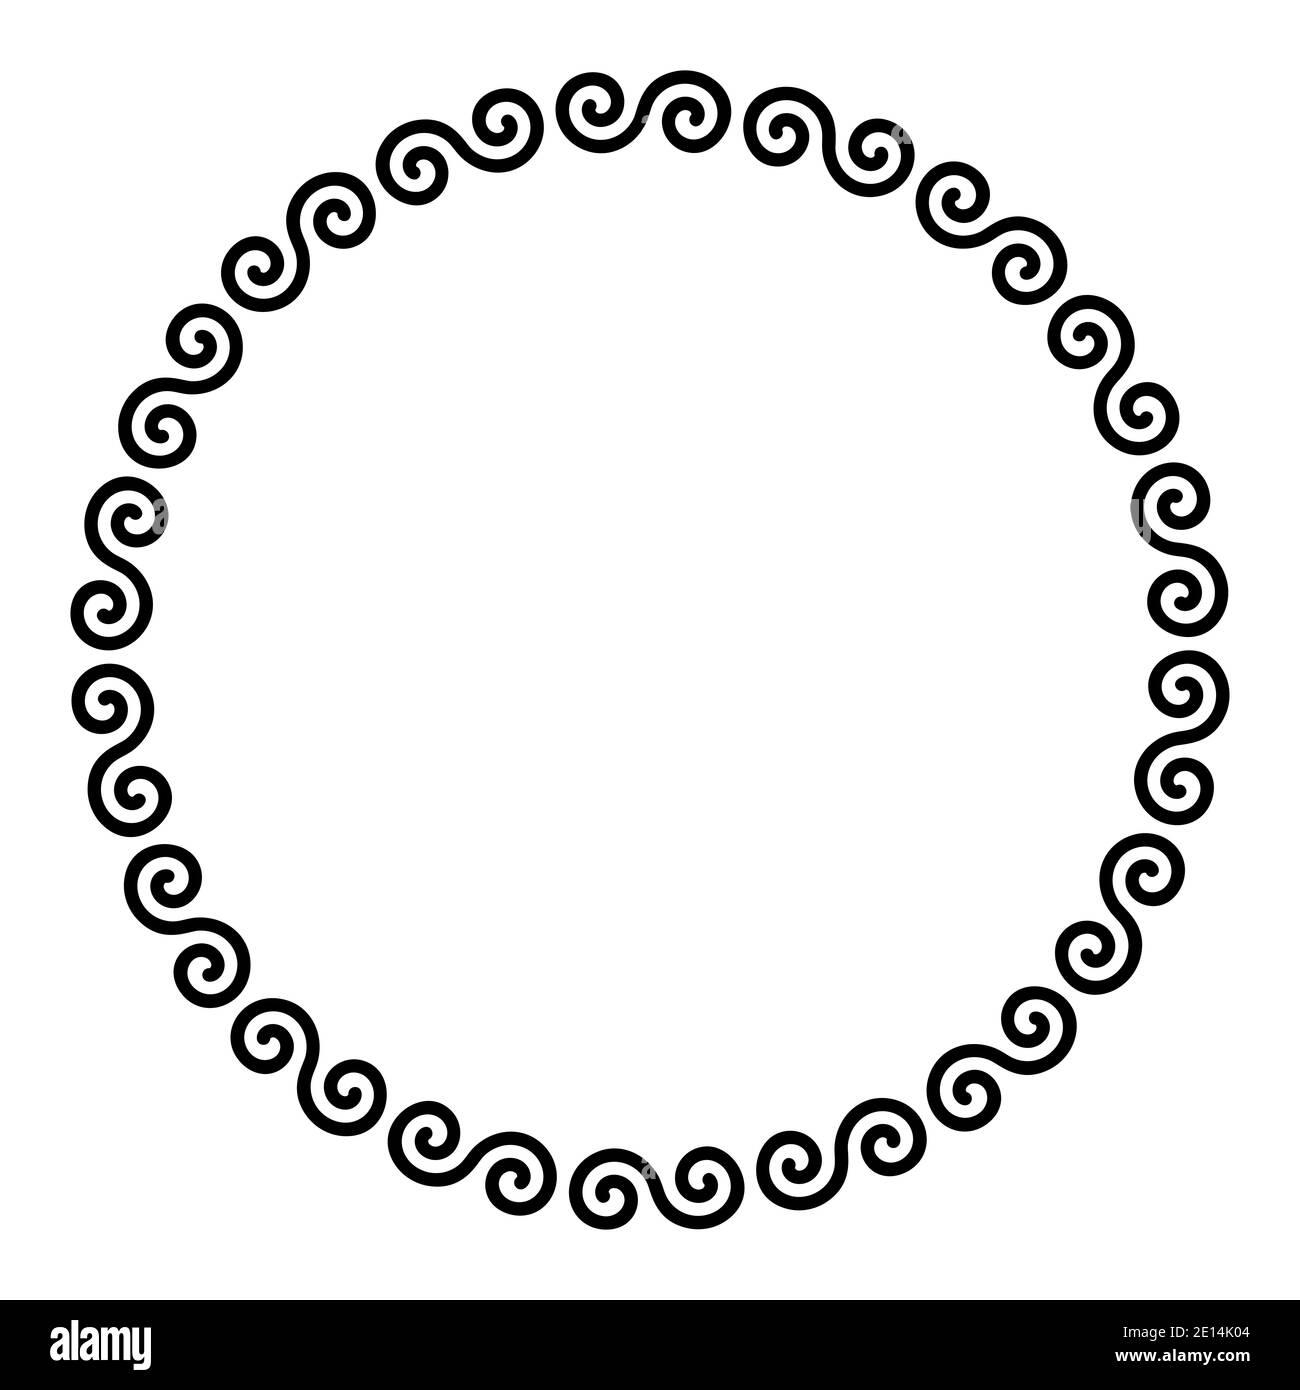 Celtic double spirals forming a circle shaped frame. Decorative border, made of alternate flipped double spirals, rotating around a midpoint. Stock Photo